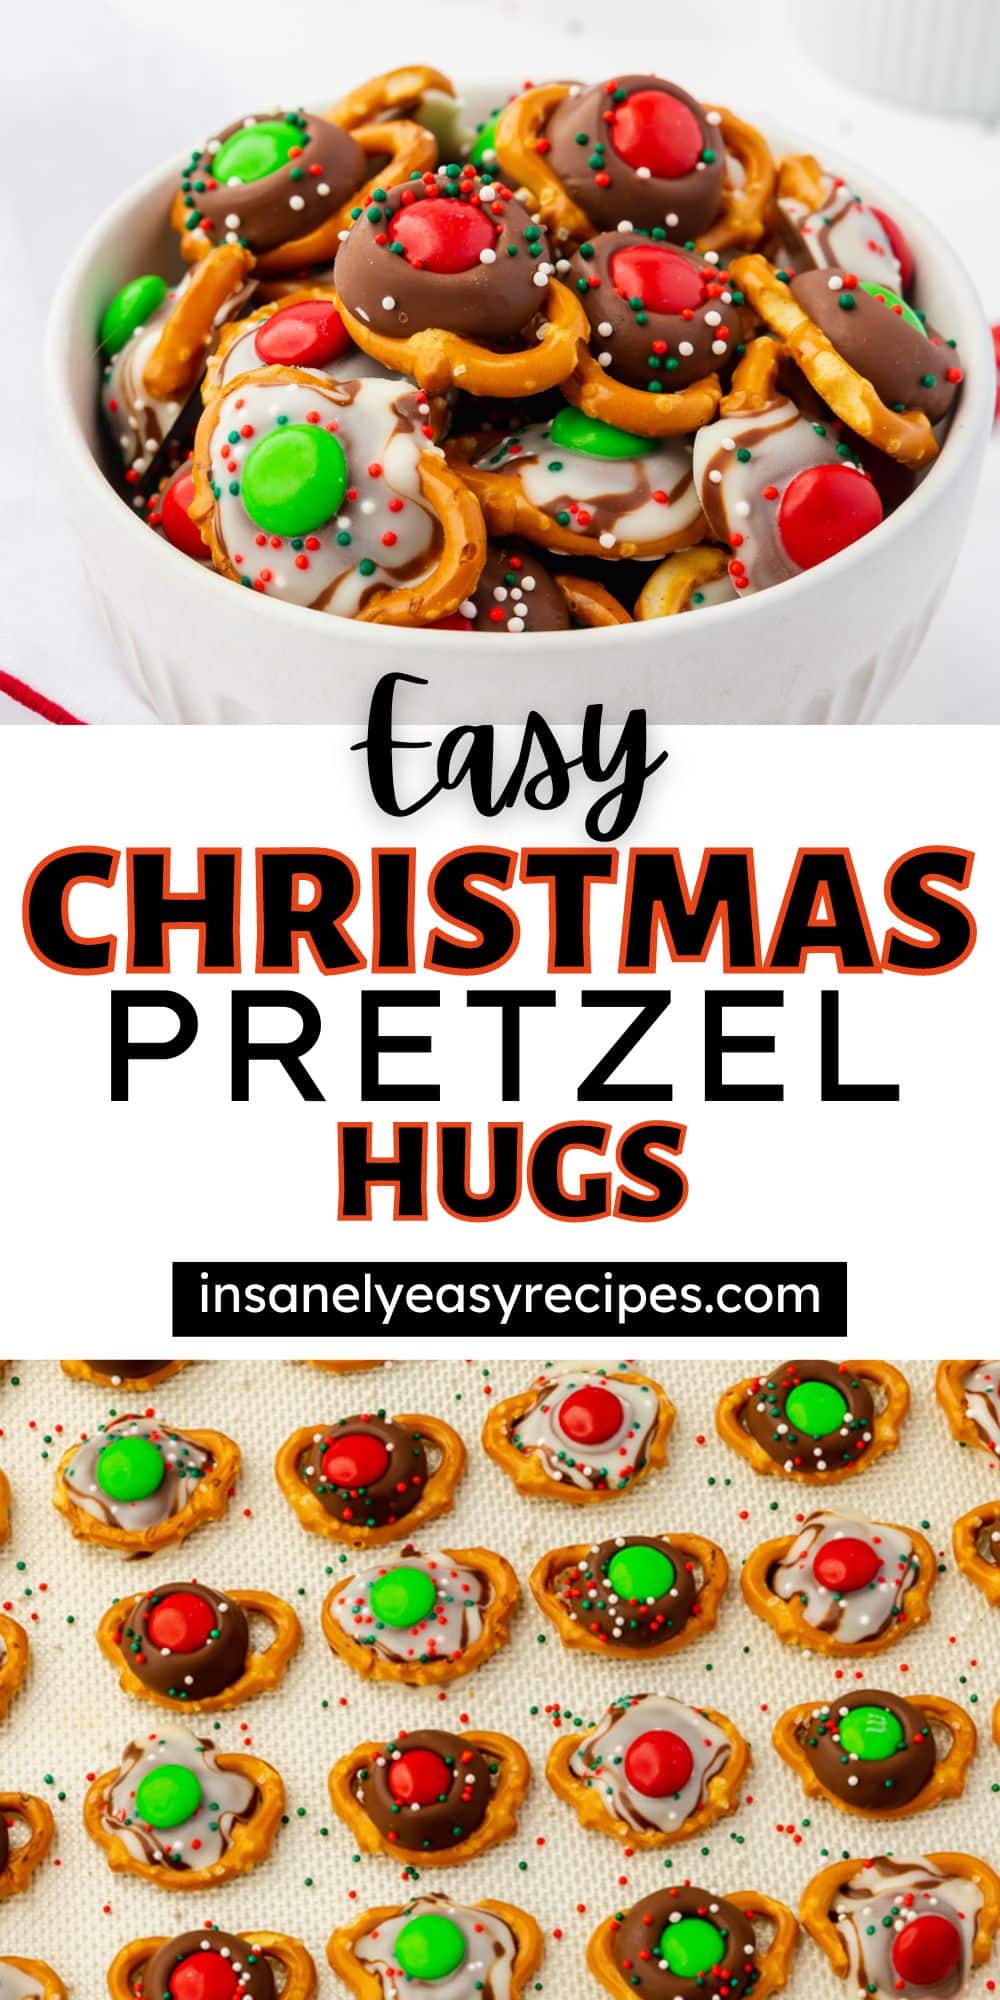 Pinterest Pin collage for Christmas Pretzels